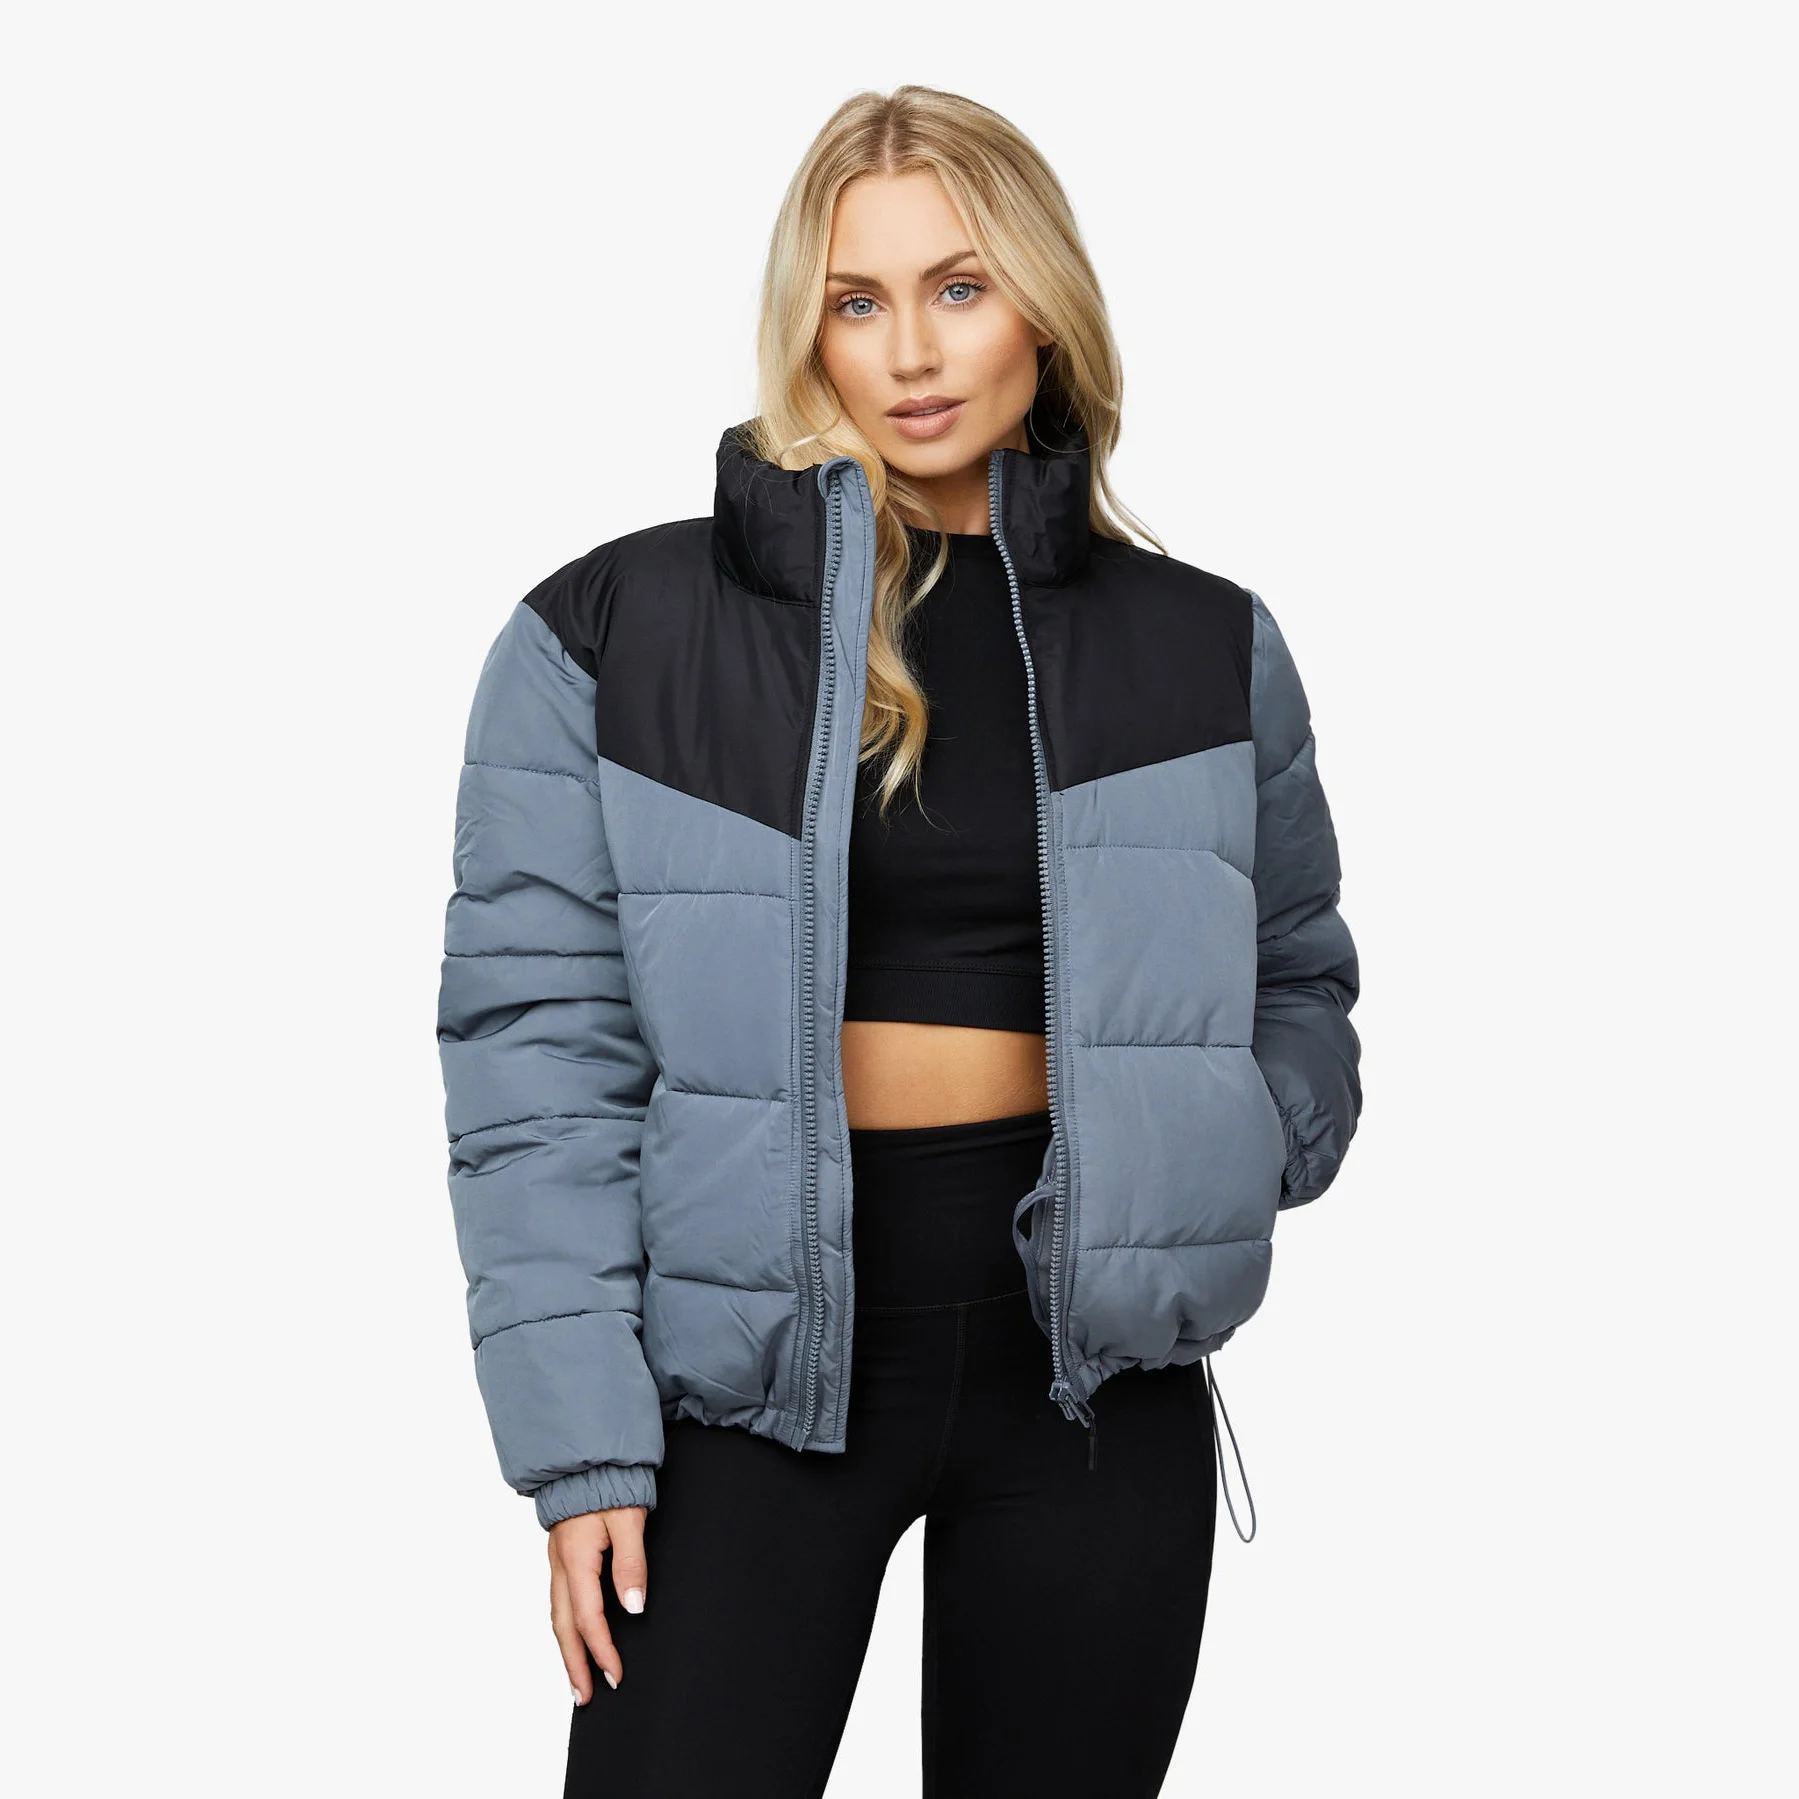 2022 Winter Puffer Jacket Ladies Warm Hooded Cotton-Padded clothes Slim Winter Jackets Women Coats